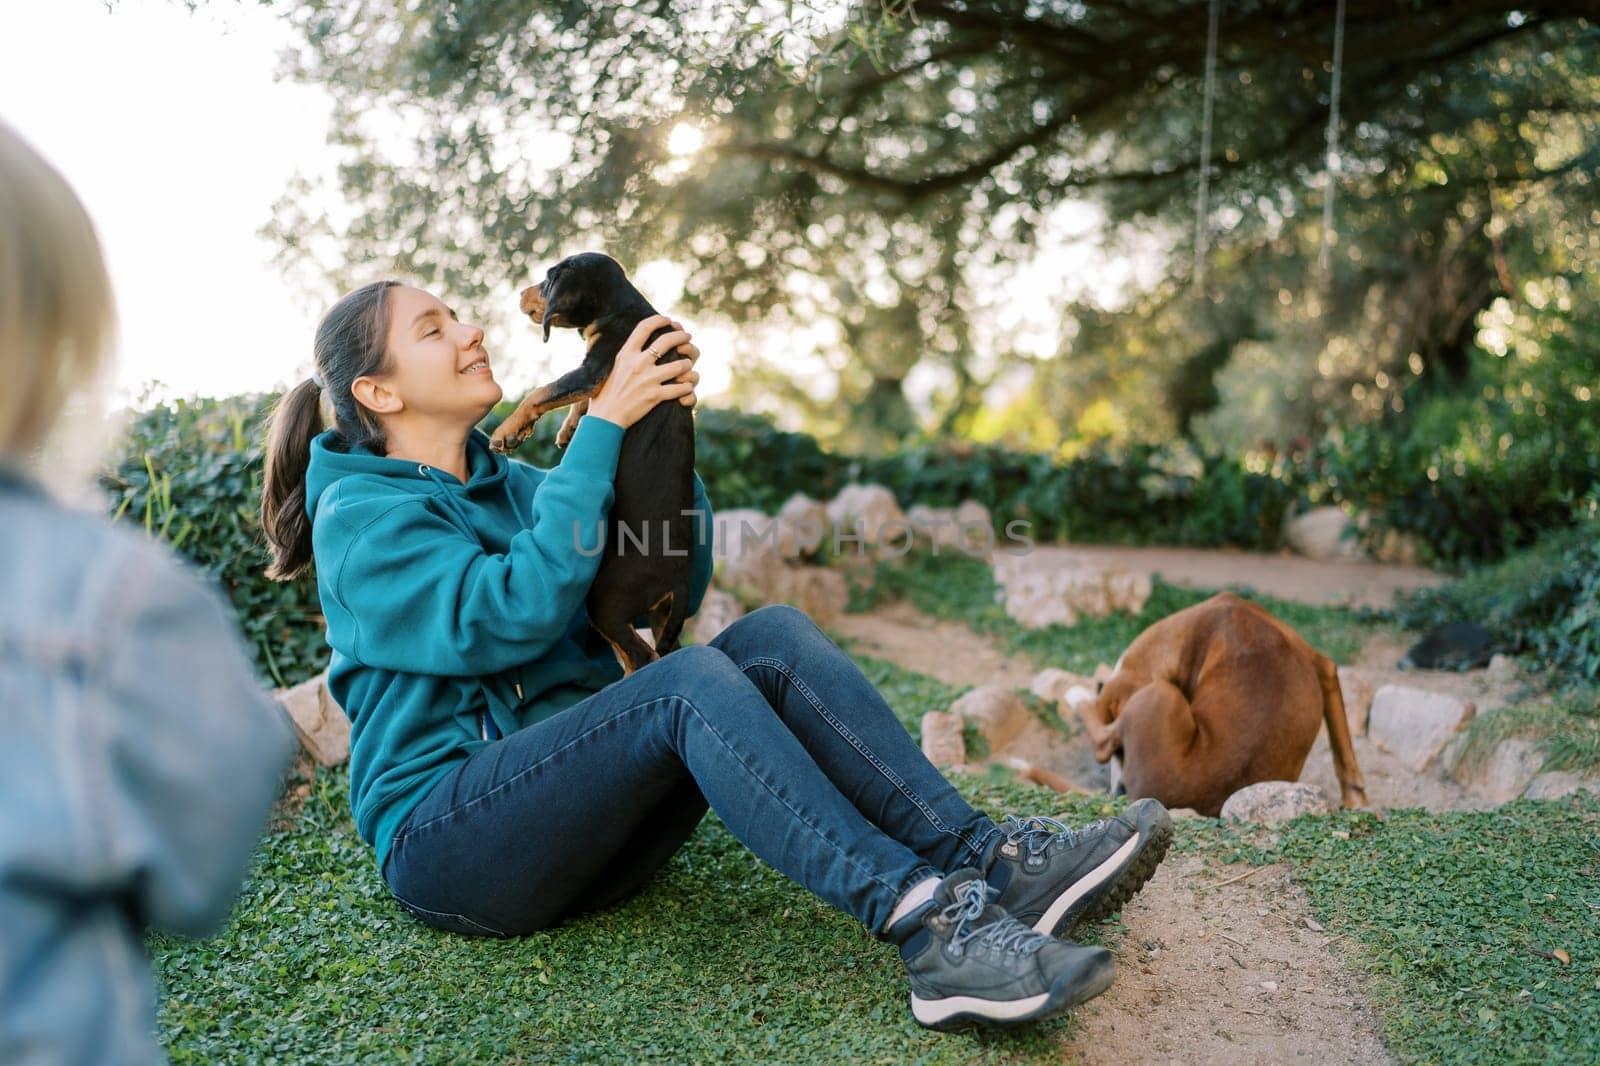 Little girl looks at her mother raising a black puppy in her arms while sitting on the grass. High quality photo